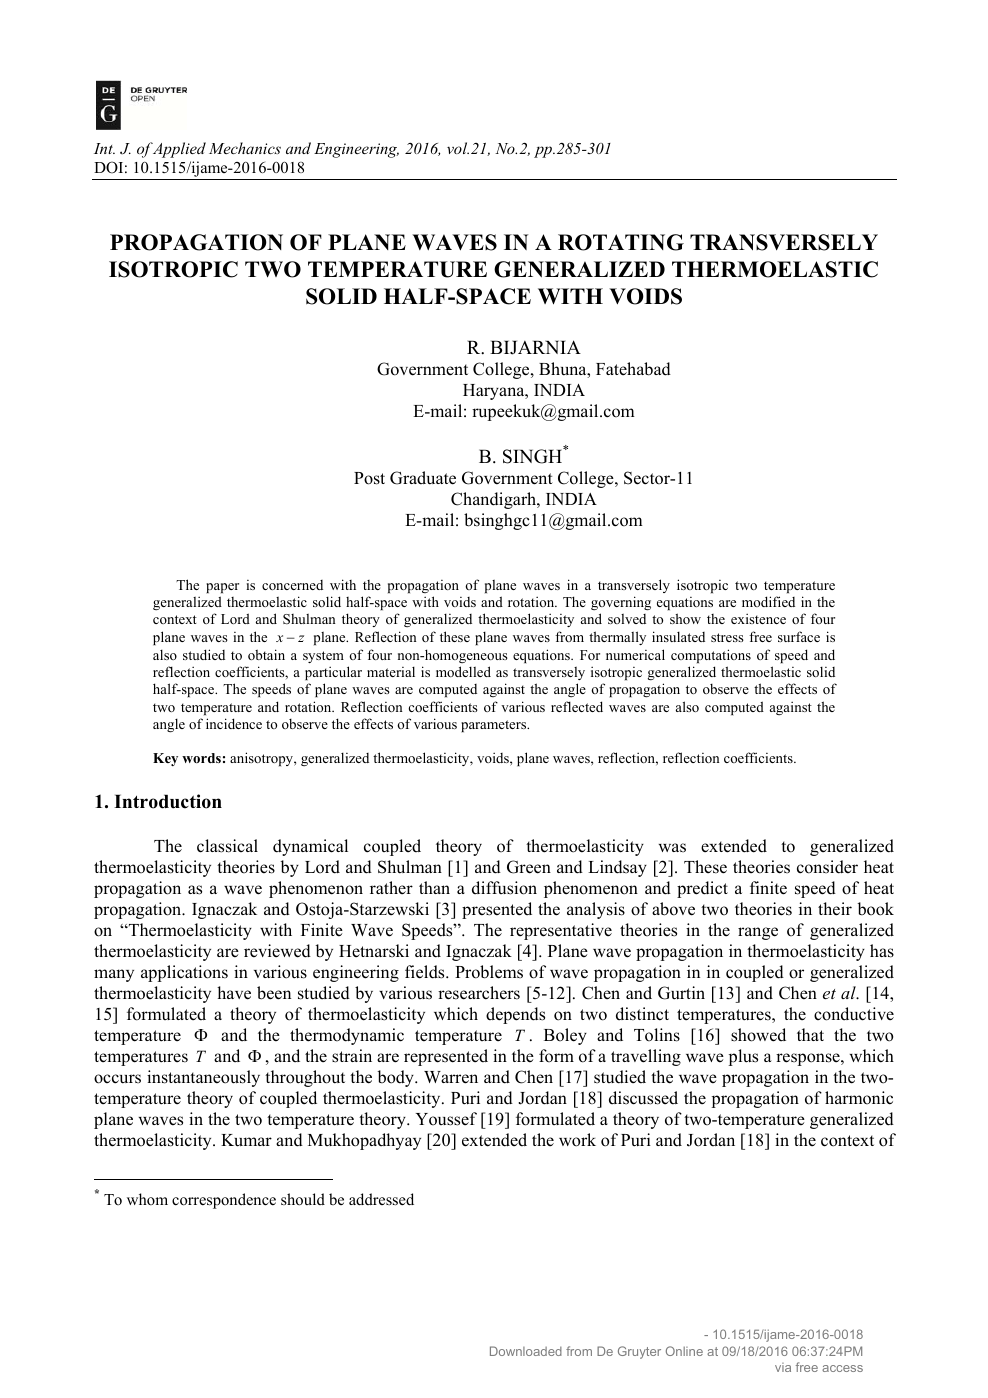 Propagation Of Plane Waves In A Rotating Transversely Isotropic Two Temperature Generalized Thermoelastic Solid Half Space With Voids Topic Of Research Paper In Materials Engineering Download Scholarly Article Pdf And Read For